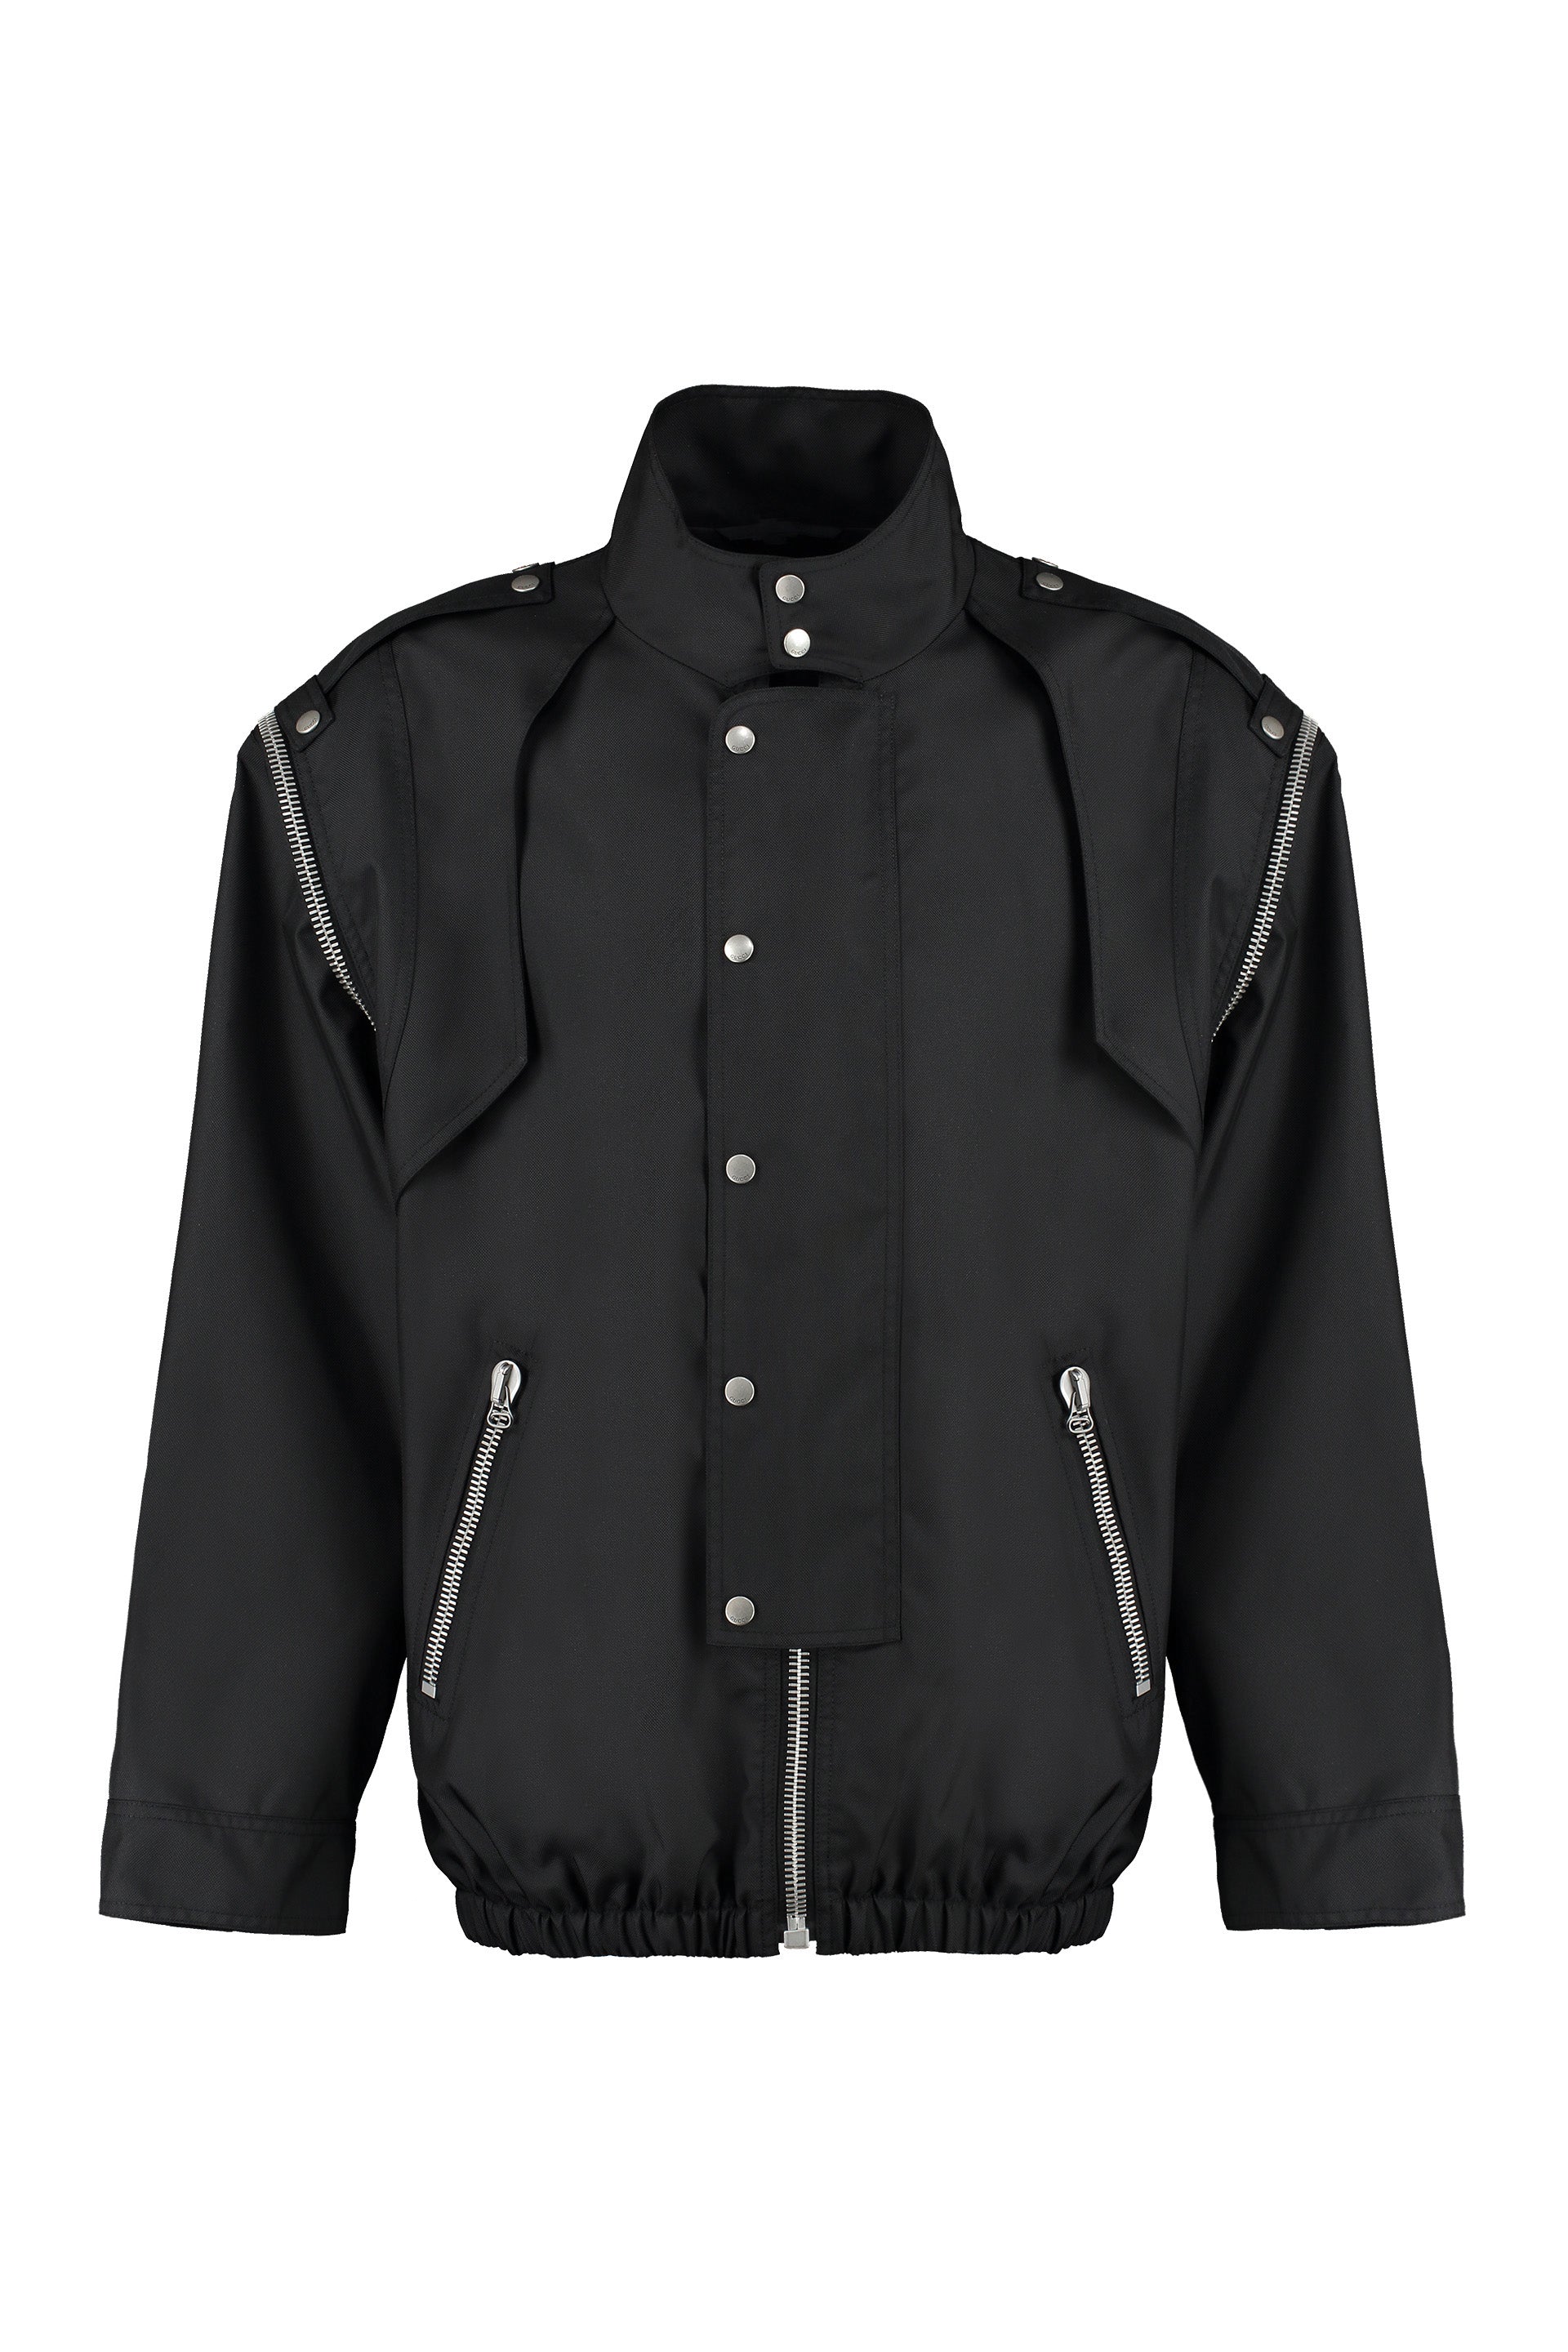 Shop Gucci Men's Black Techno Fabric Jacket For Ss23